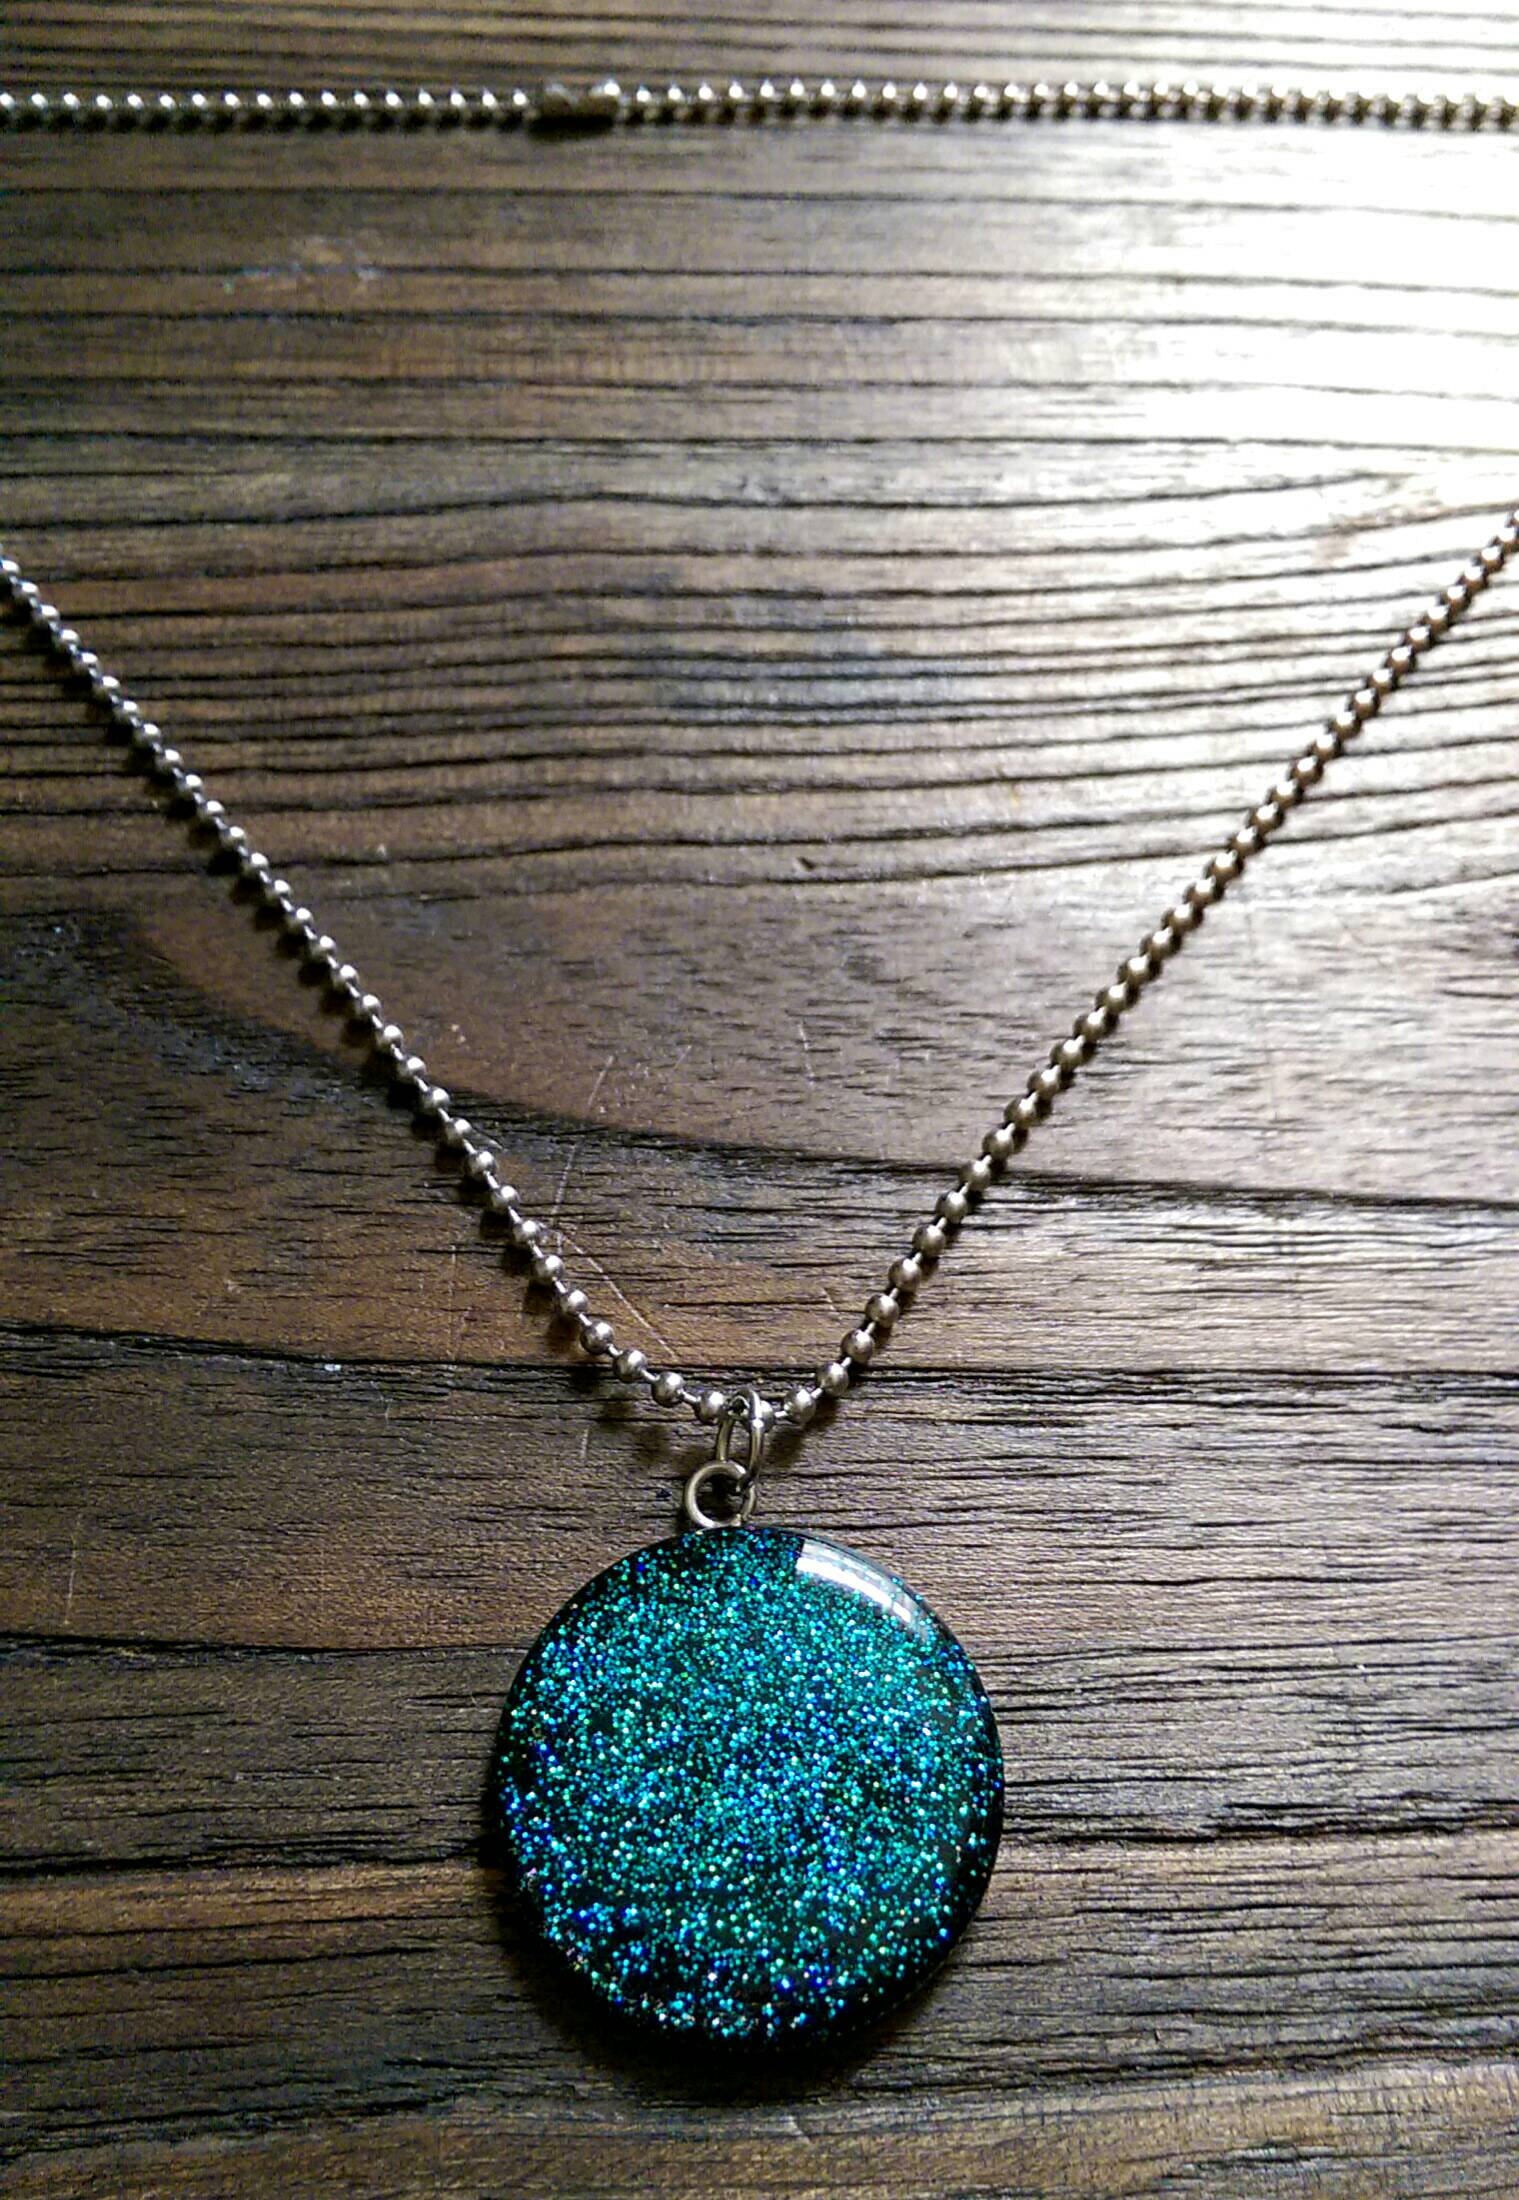 Resin Circle Necklace Blue and Turquoise mix glitter Stainless Steel. 30mm Circle Pendant. - Silver and Resin Designs